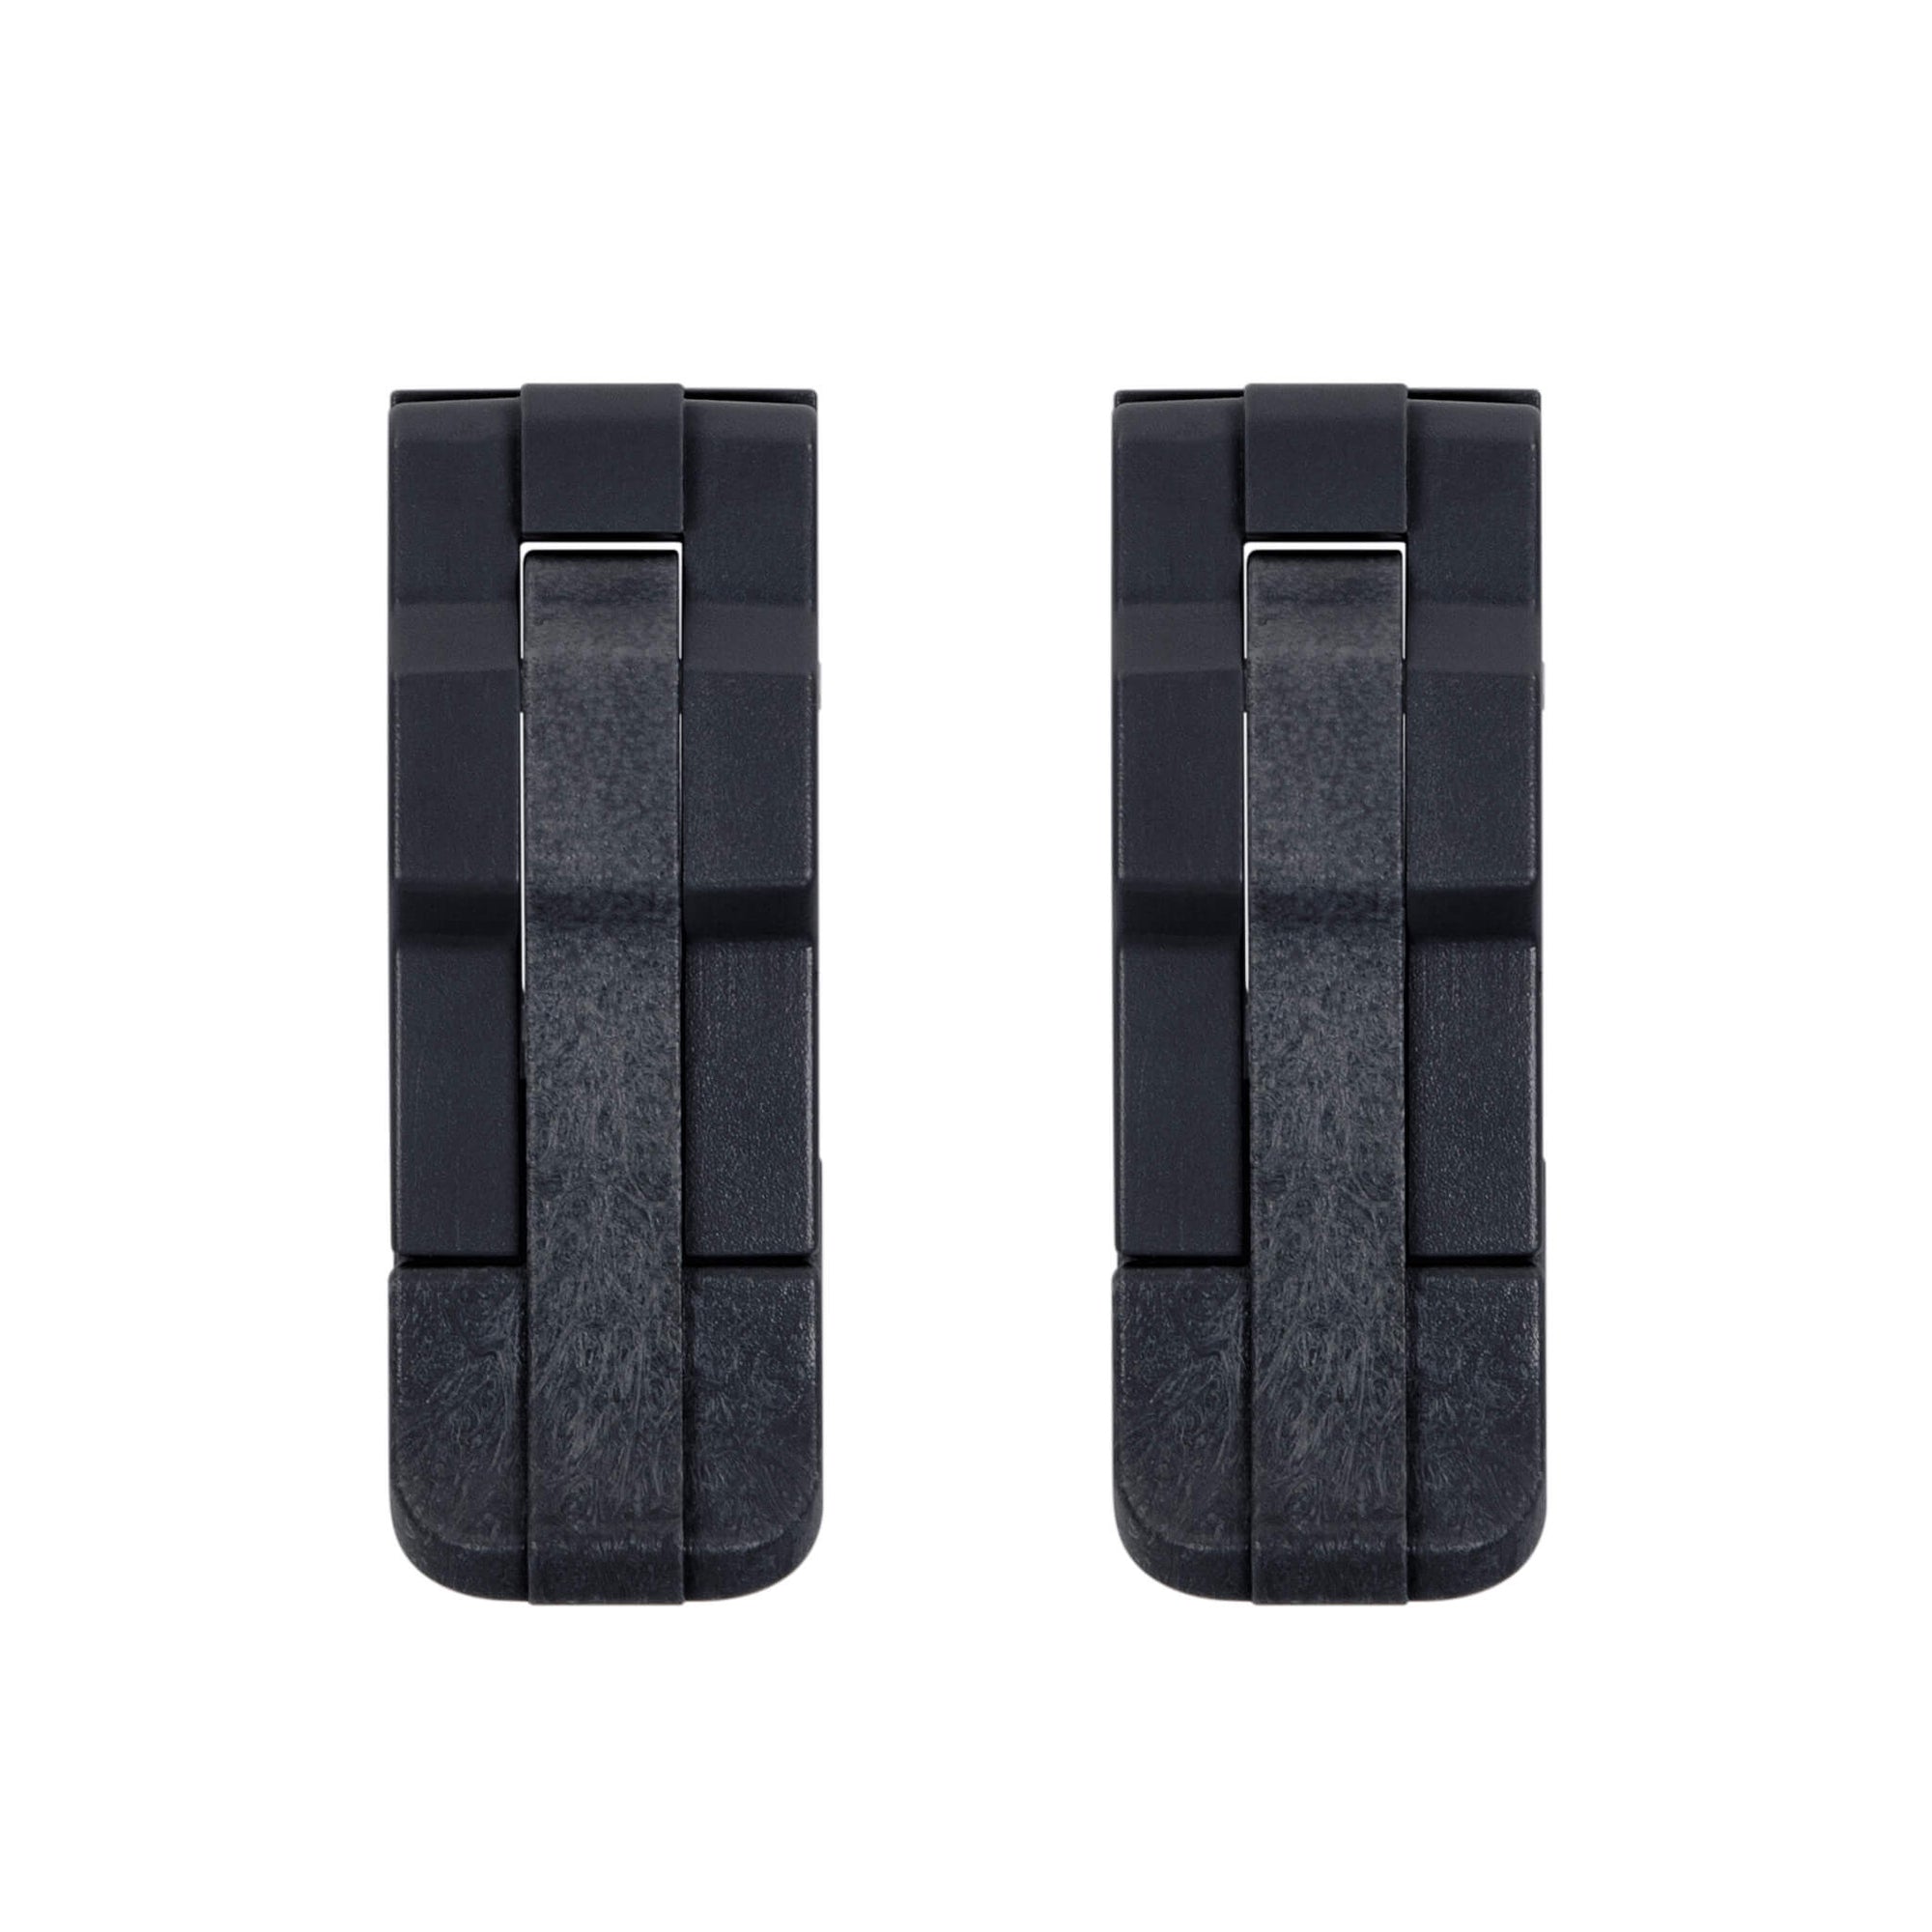 Pelican 1200 Replacement Latches, Black (Set of 2) ColorCase 